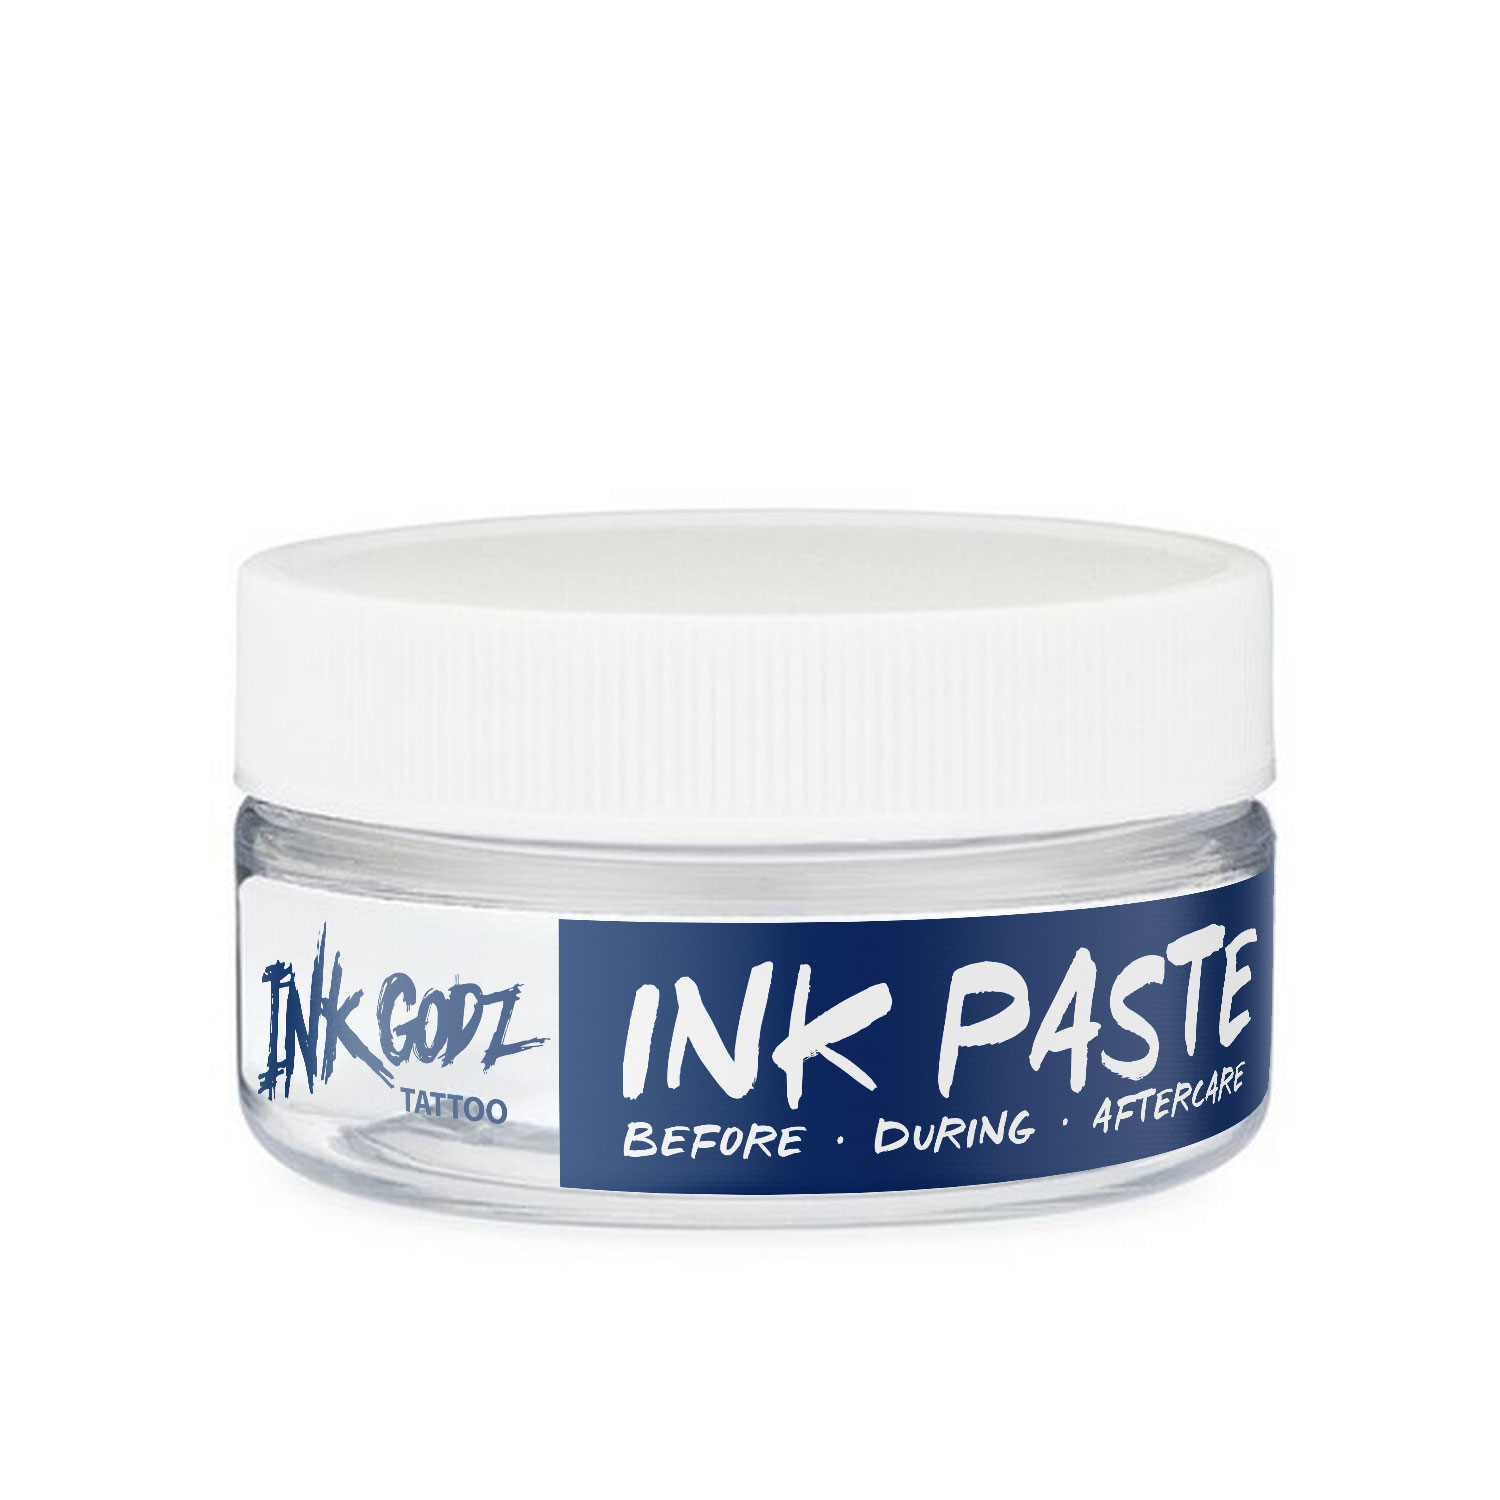 Ink Paste Tattoo Aftercare photo